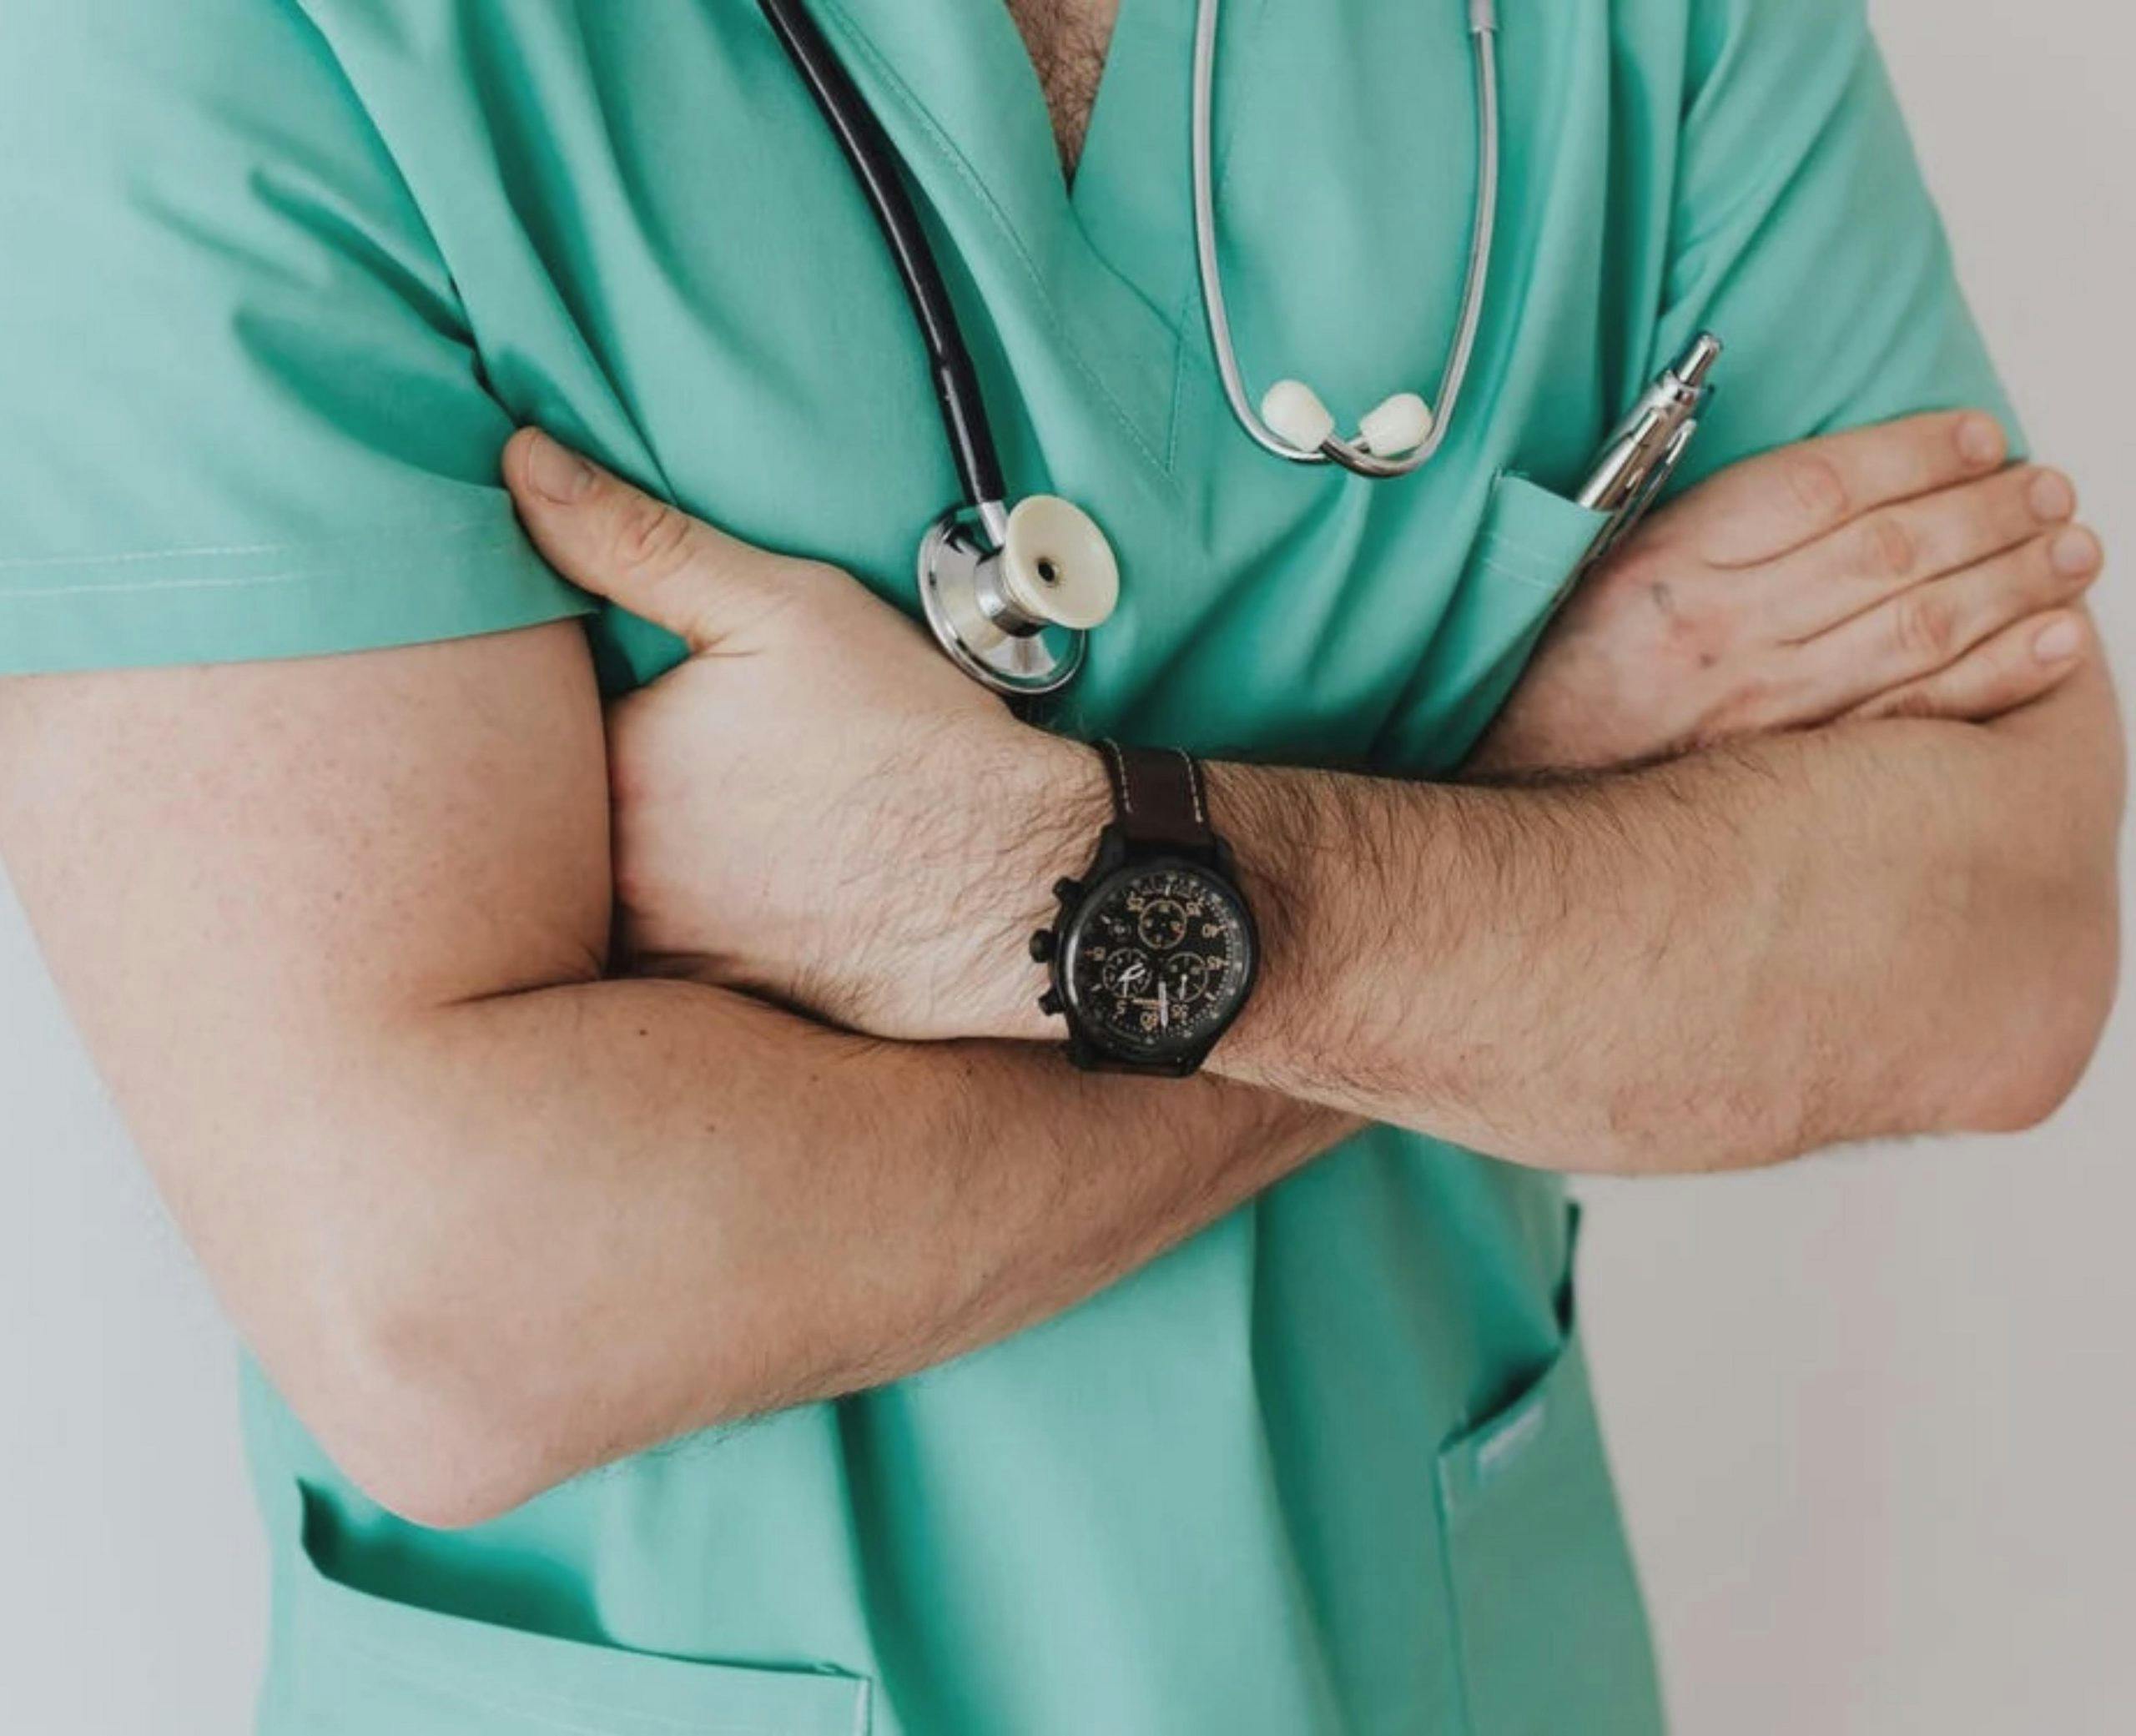 Close-up photo of a man's torso with his arms folded. He is wearing green hospital scrubs, and has a stethoscope around his neck.